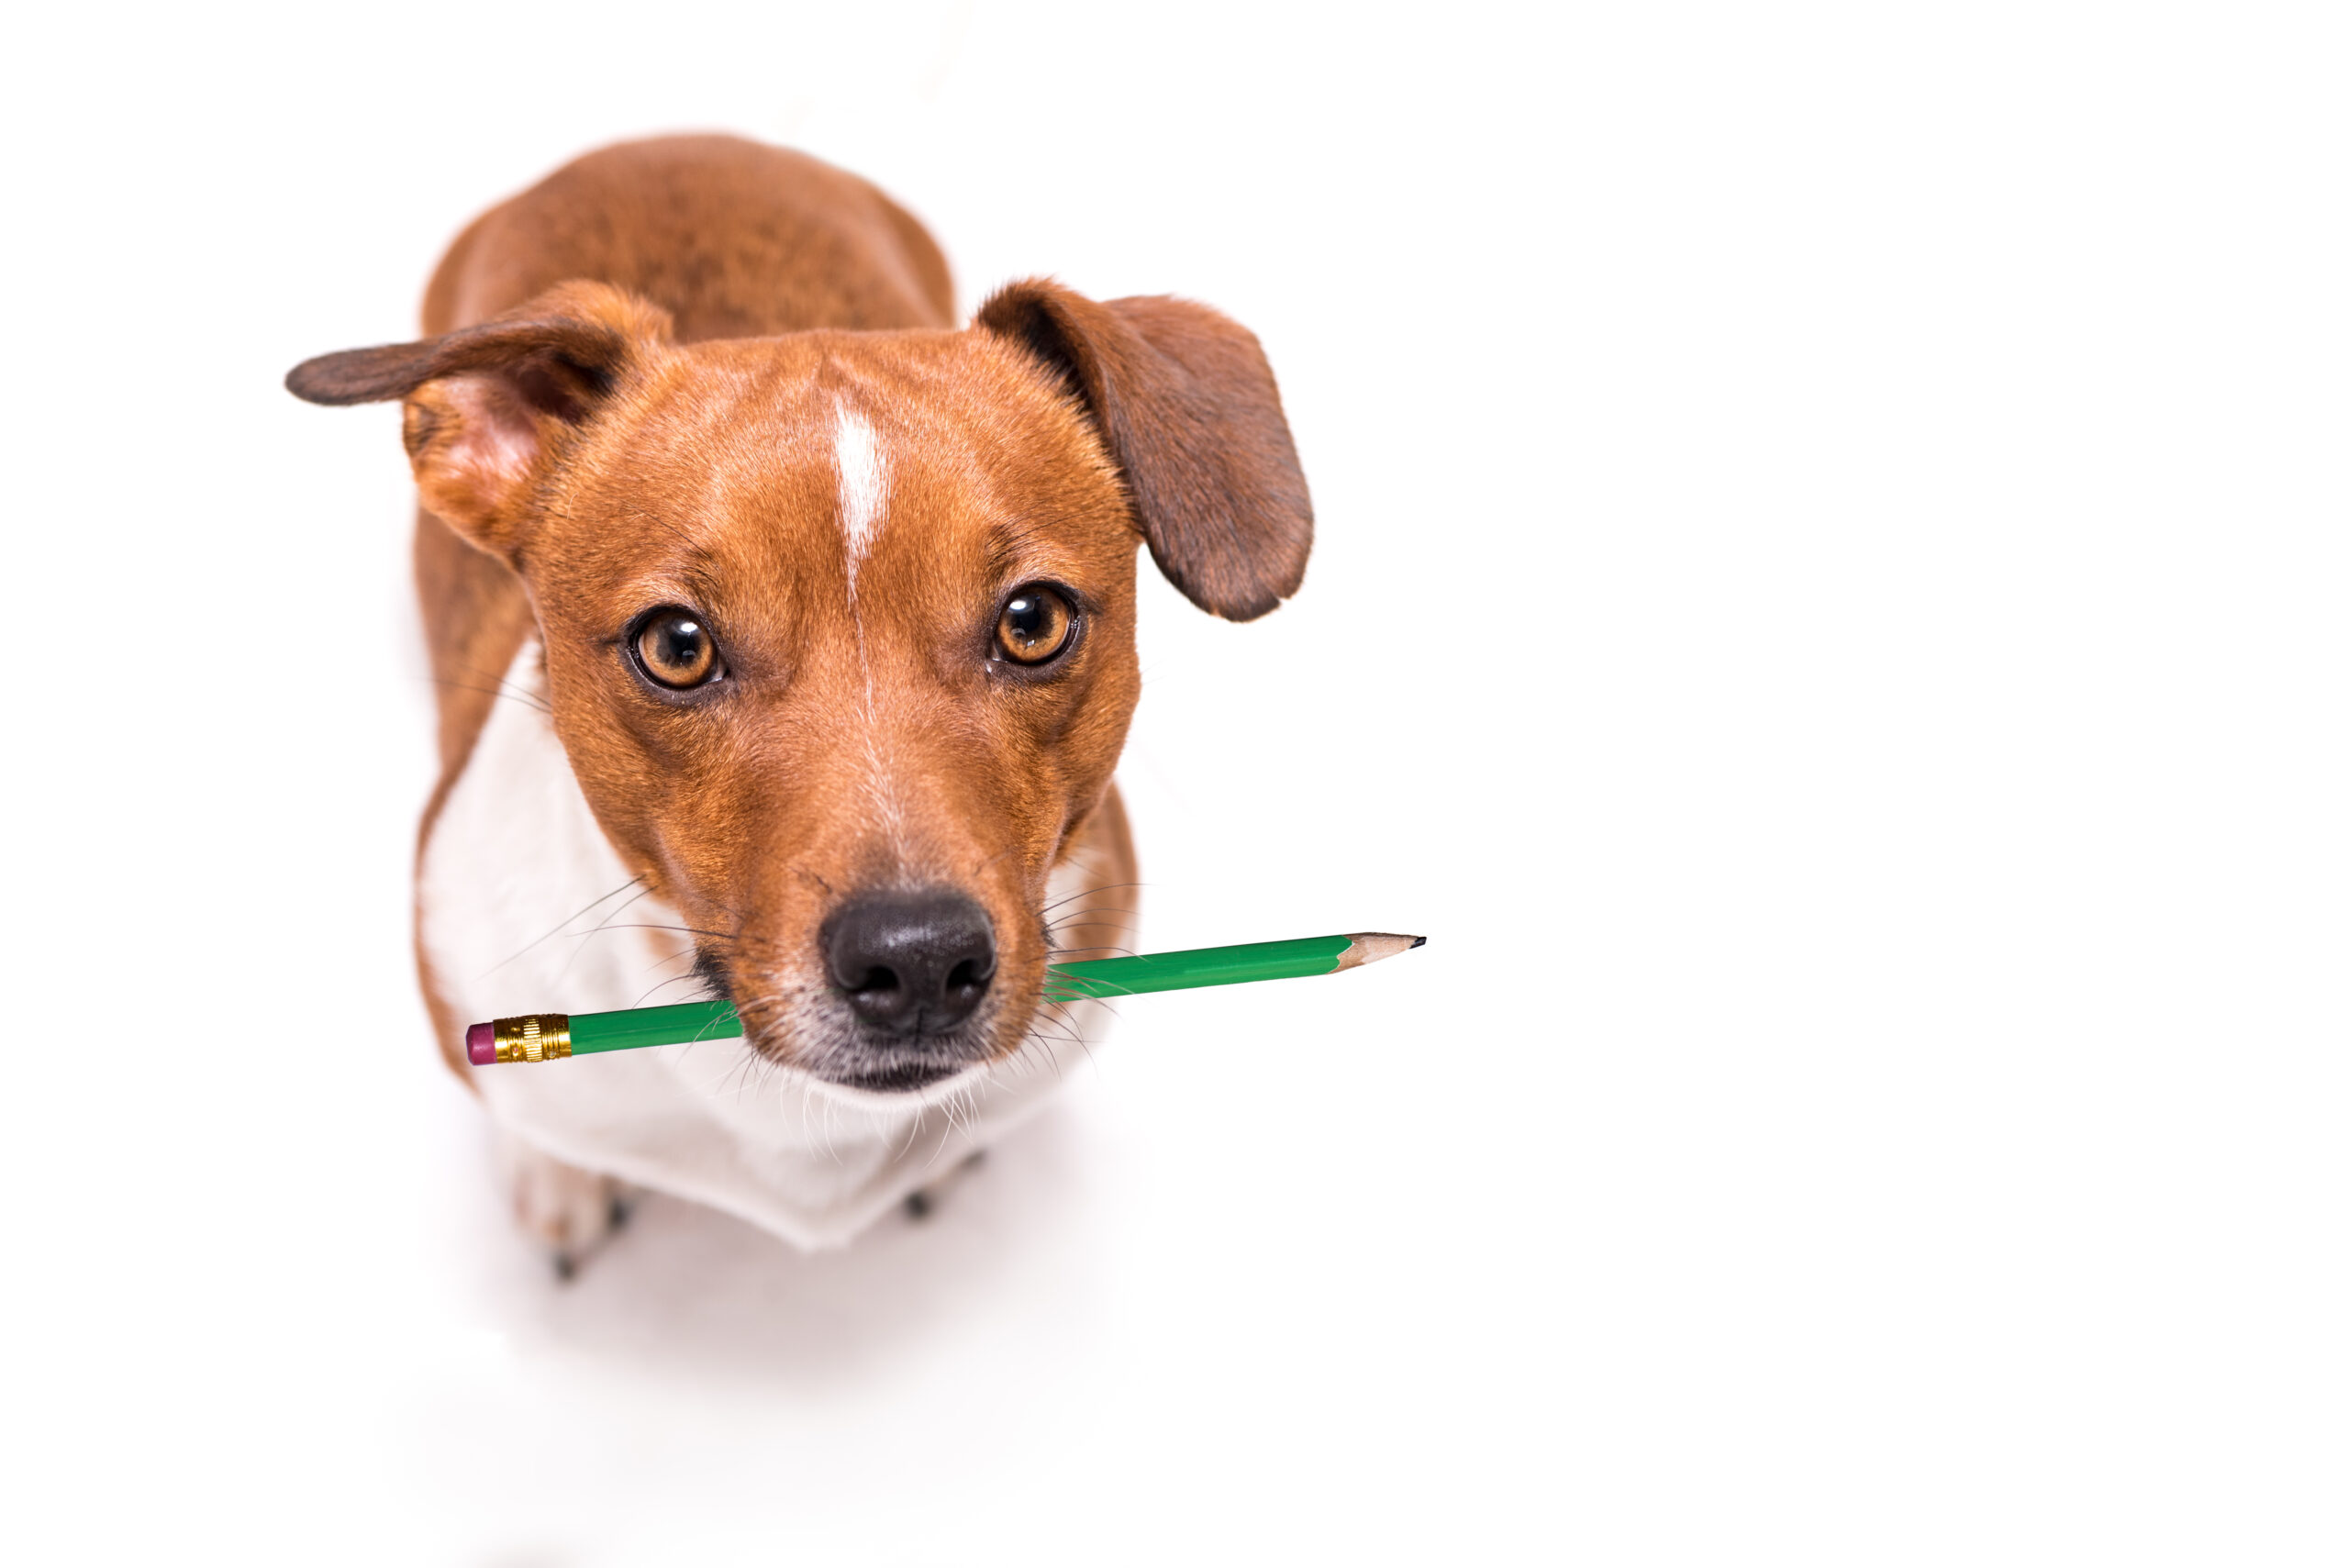 Adorable Jack Russell Terrier dog holds a pencil in his mouth. and is looking up. Cute office dog